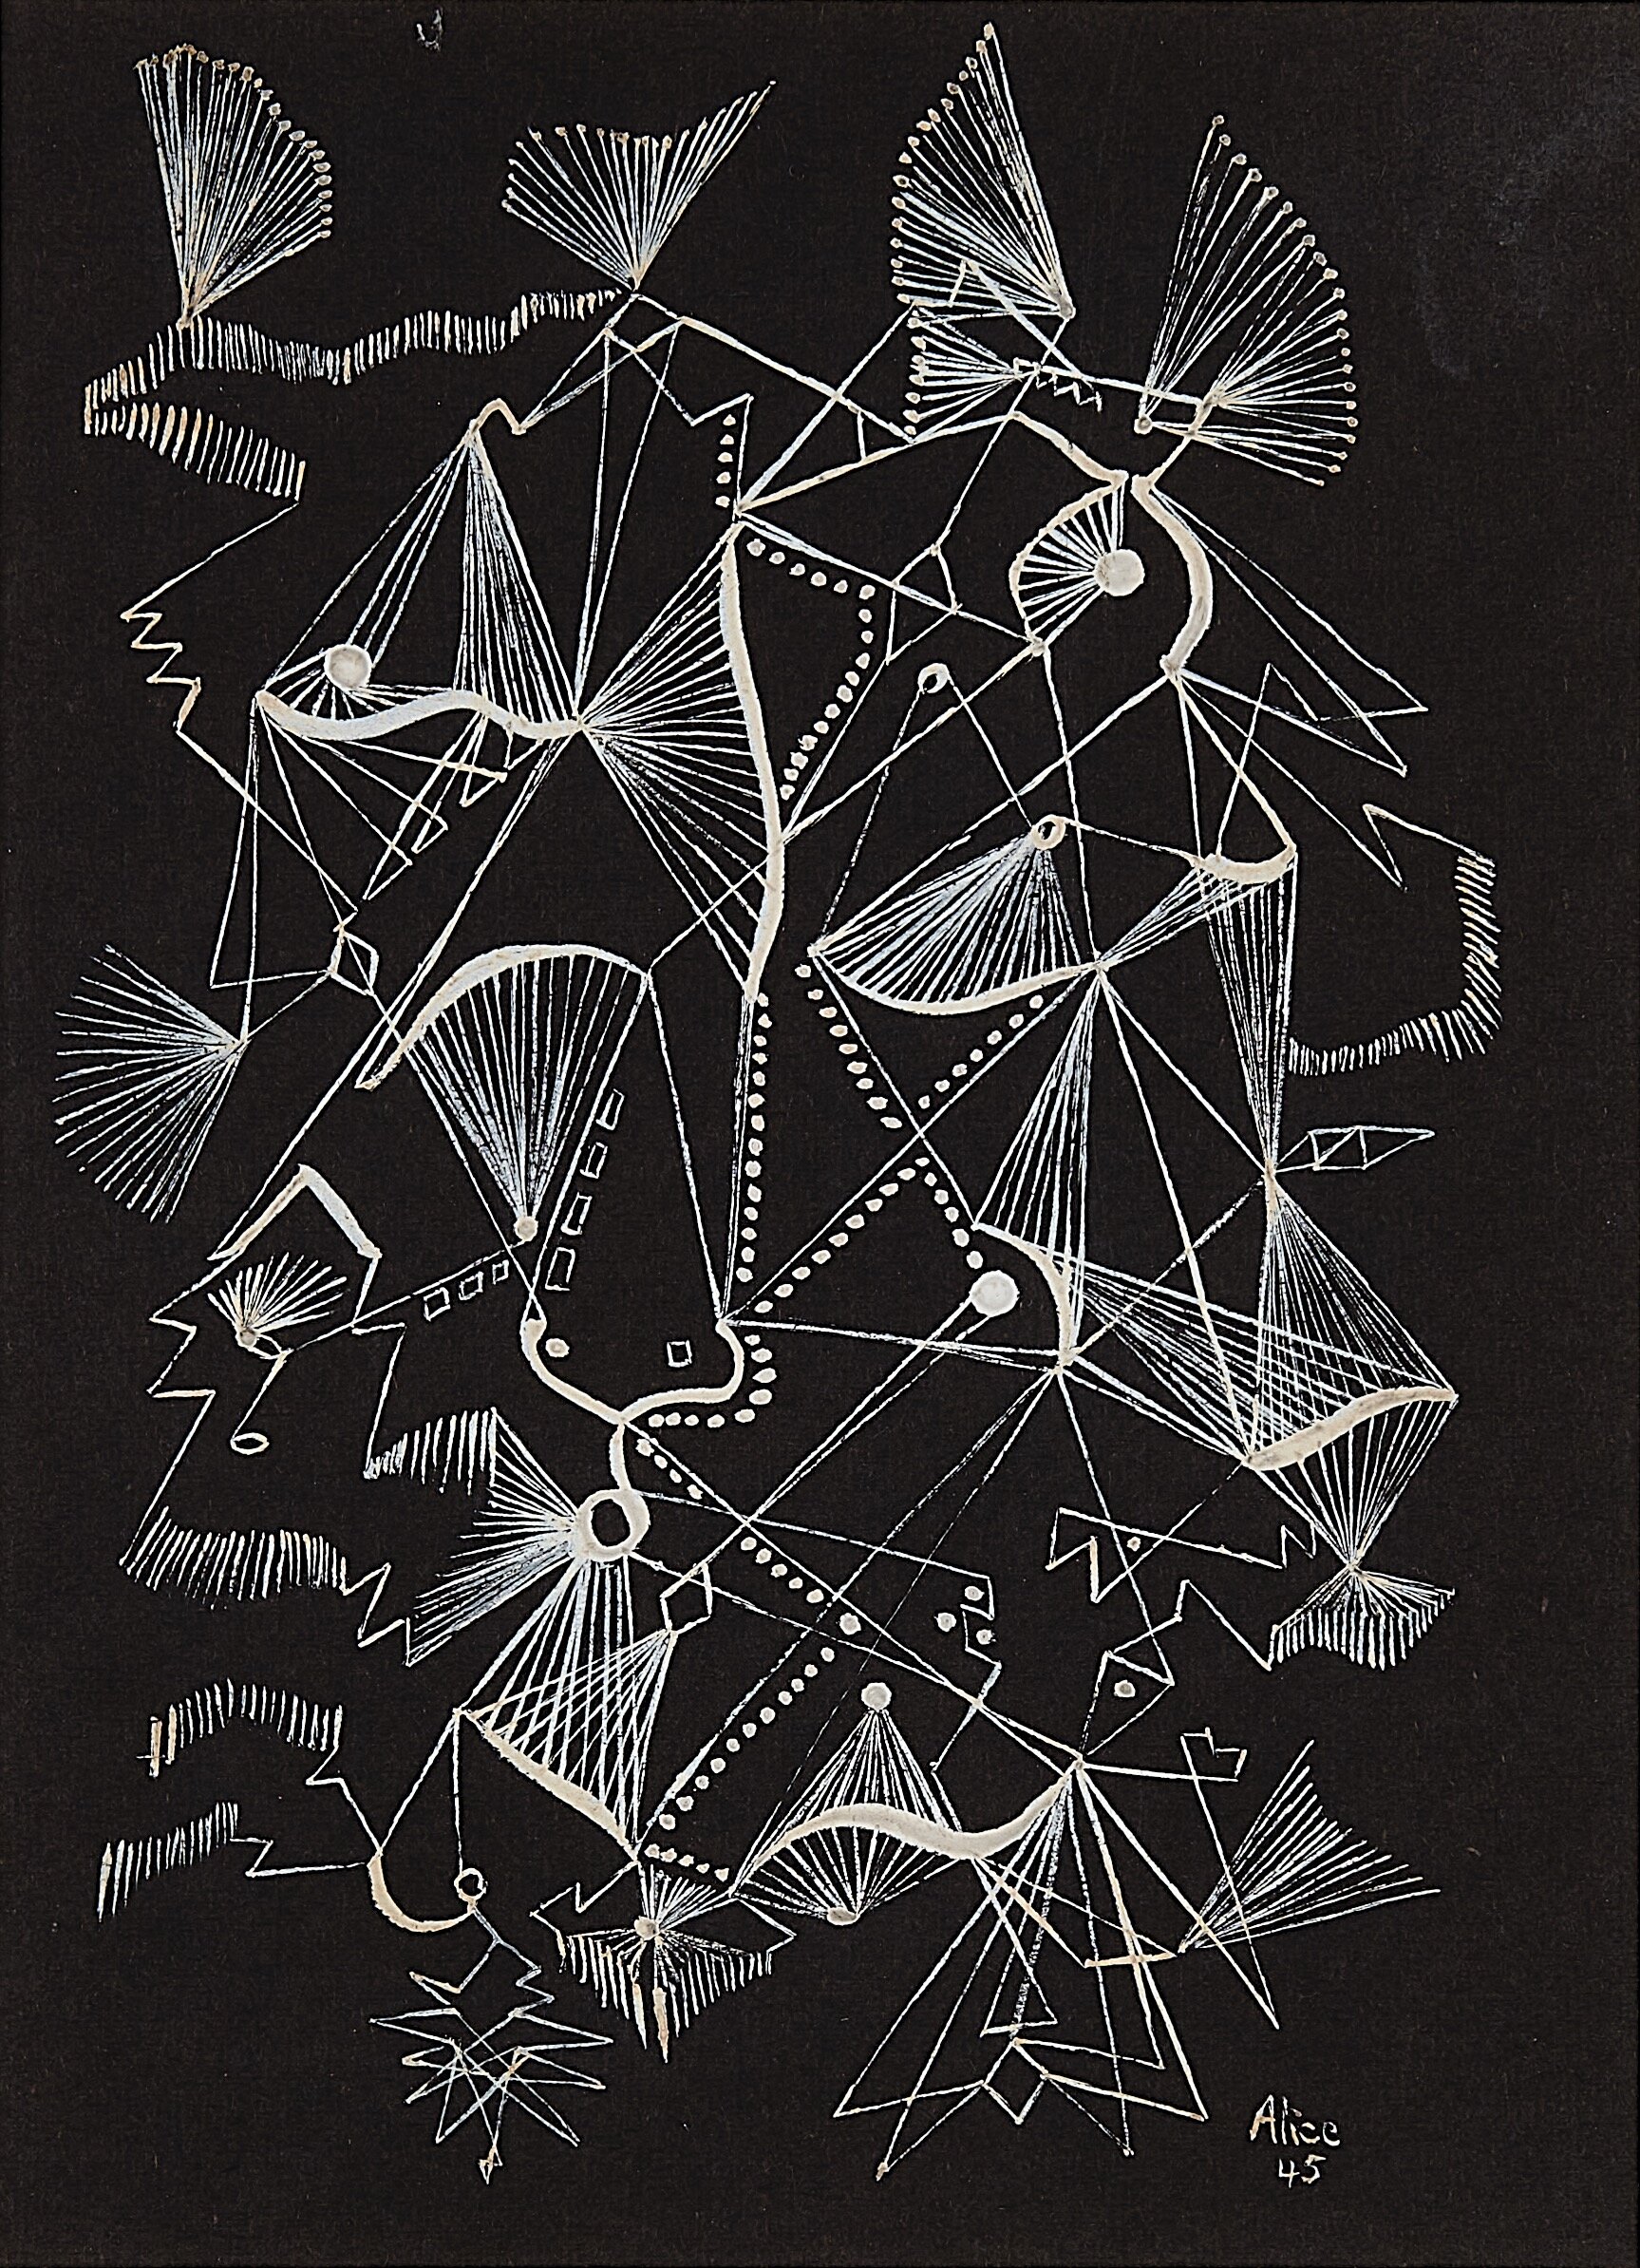  Alice Rahon,  Untitled (from the Crystals in Space series) , 1945, gouache on paper, 6 1/2 x 4 3/4 inches (16.5 x 11.9 cm) 